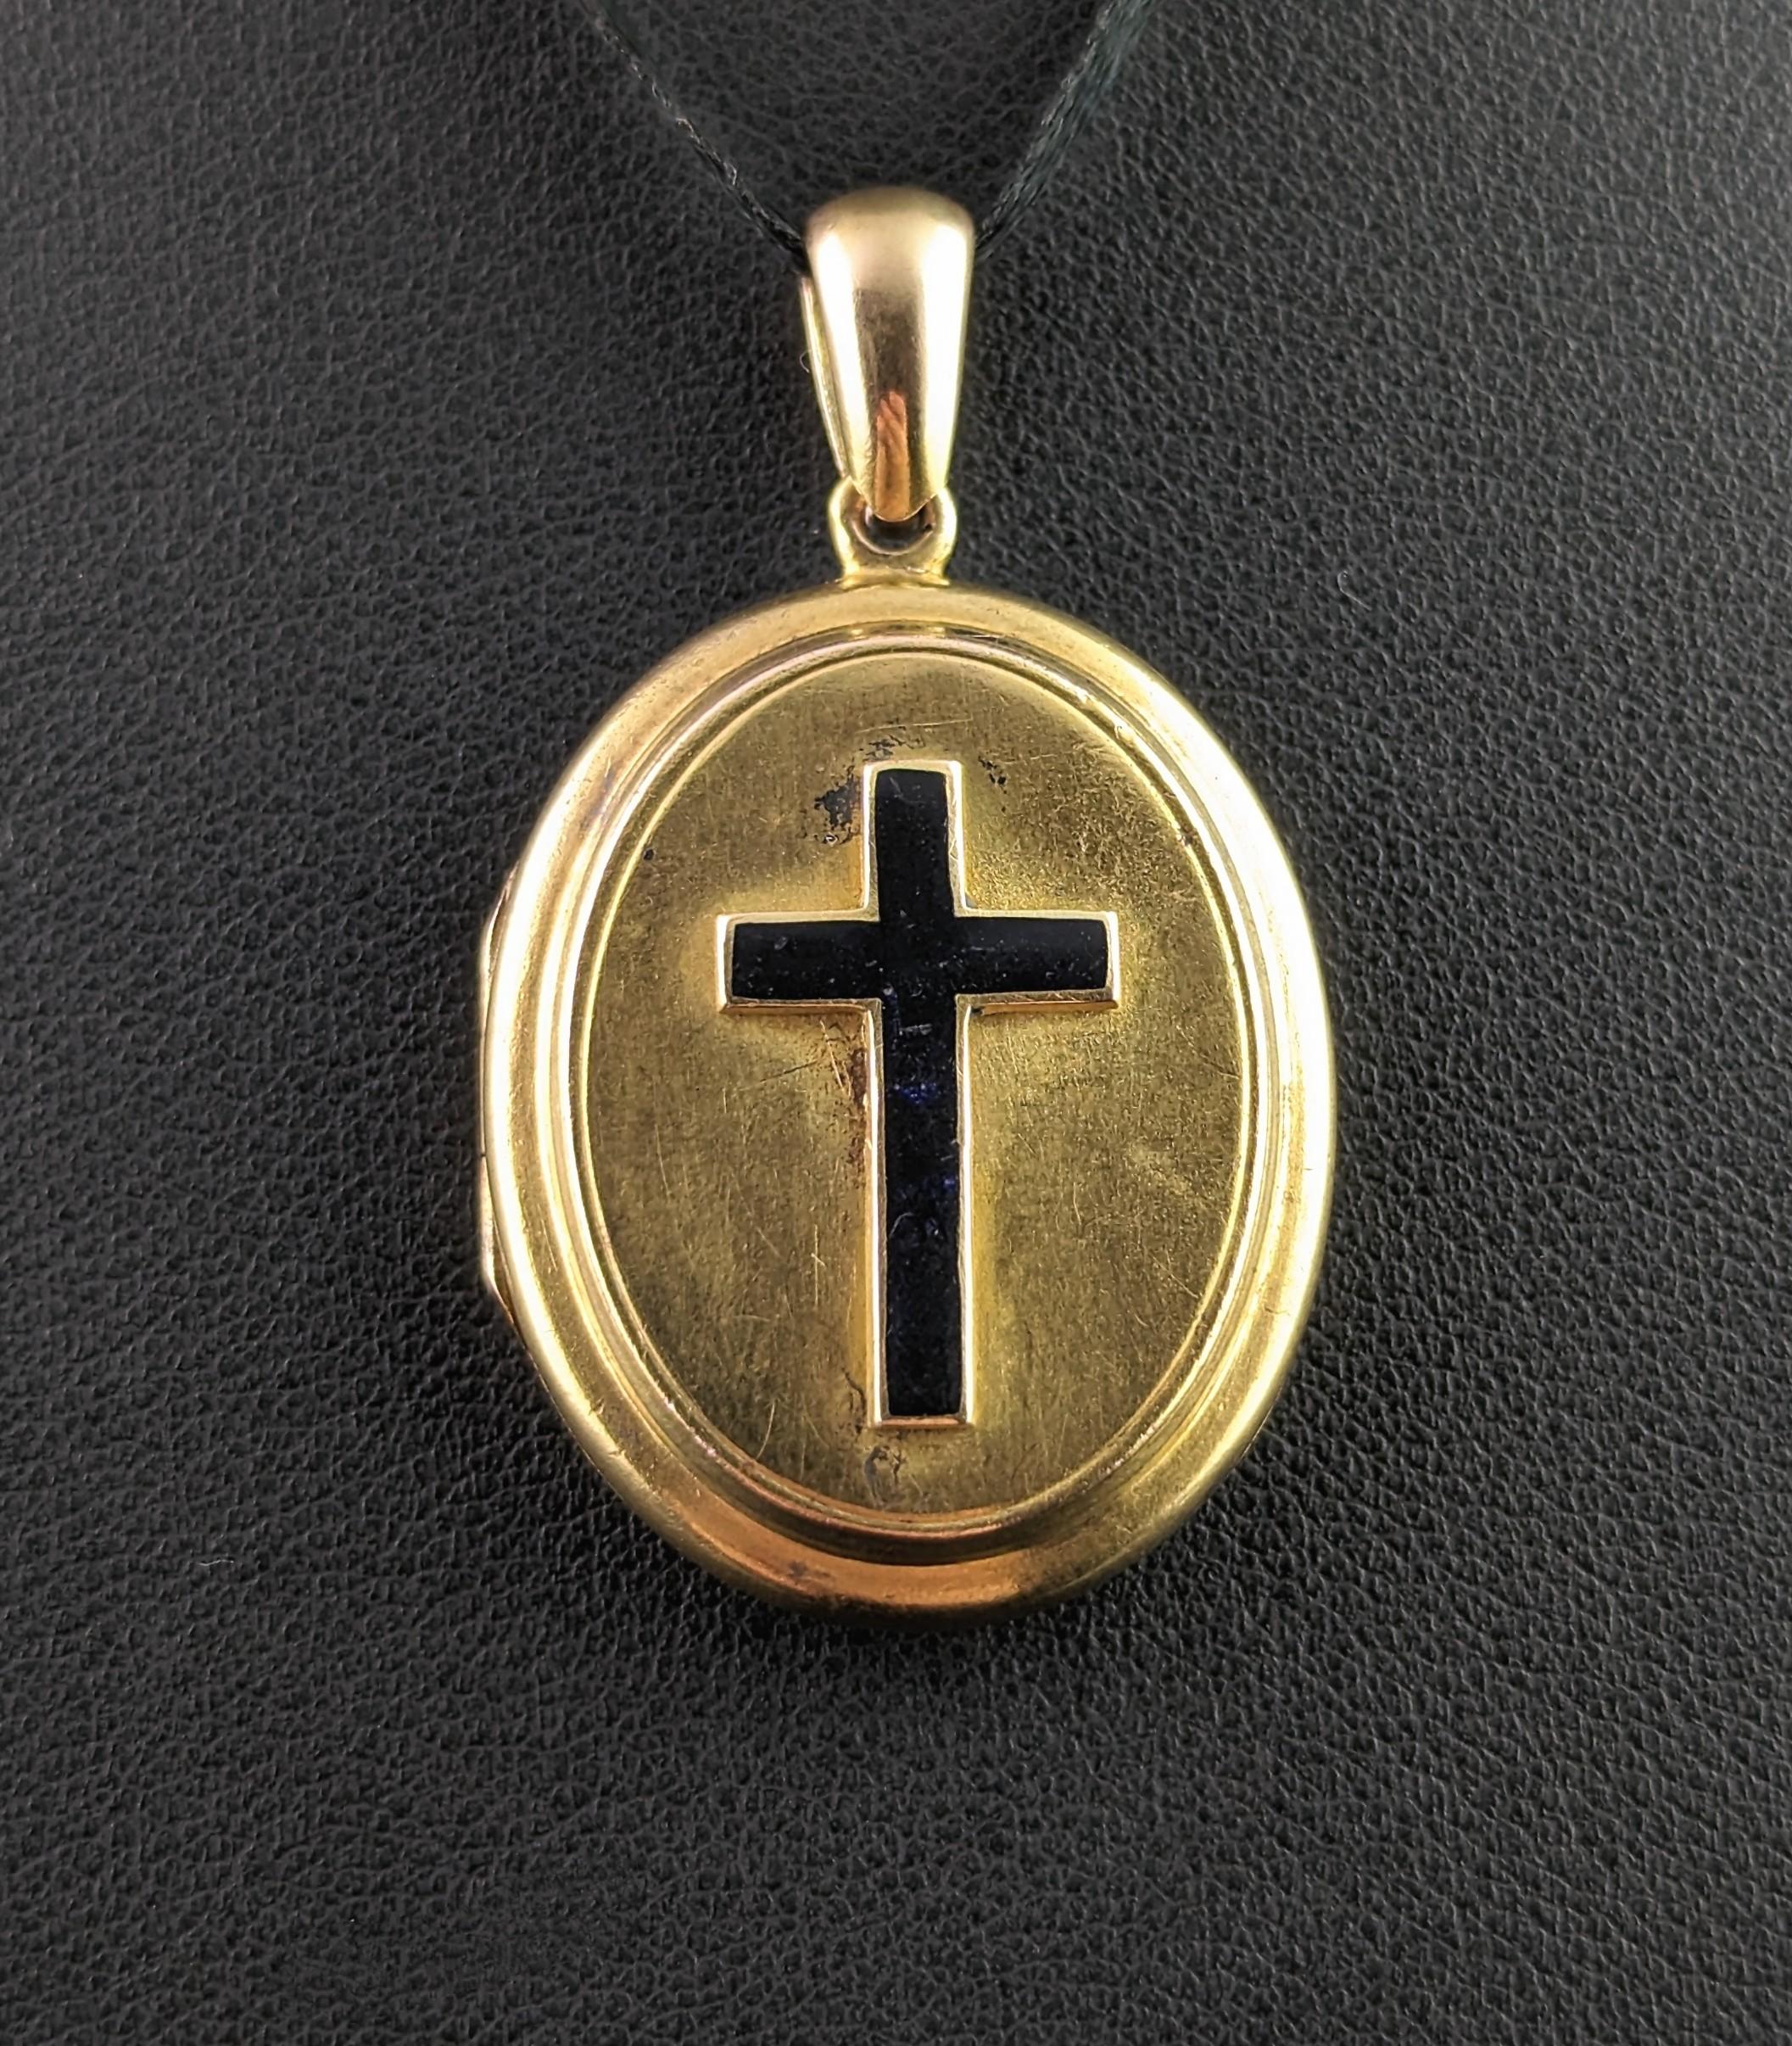 This beautiful antique 18kt gold Mourning locket is really a very special and sentimental piece.

Rich aged 18kt gold with a raised repousse cross applied to the front in inky black enamel, black being a commonly used colour on Mourning jewels and